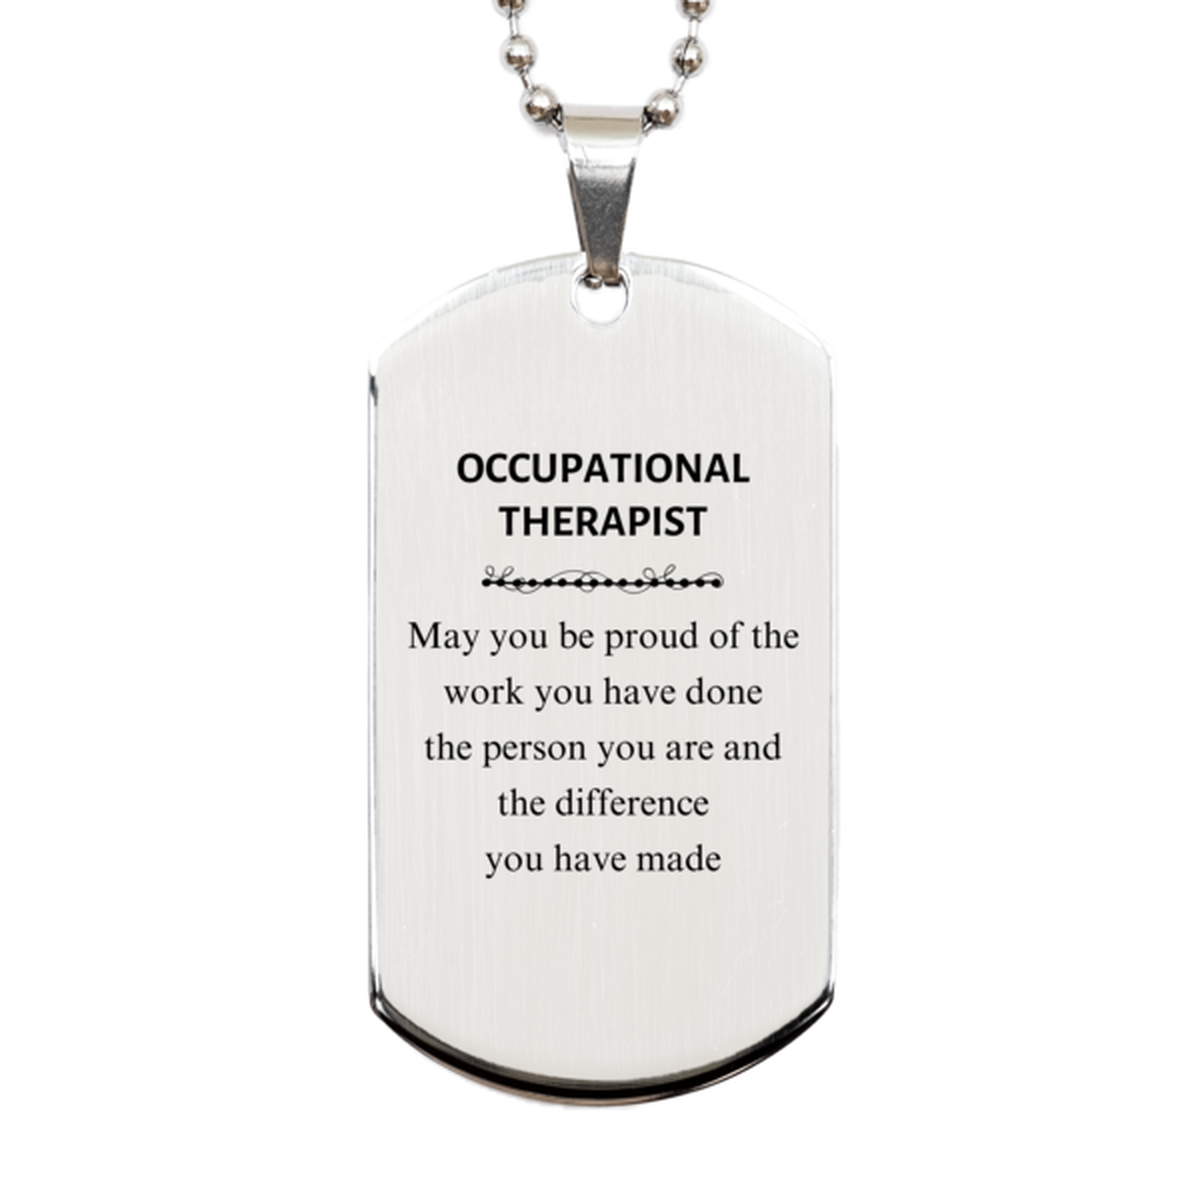 Occupational Therapist May you be proud of the work you have done, Retirement Occupational Therapist Silver Dog Tag for Colleague Appreciation Gifts Amazing for Occupational Therapist